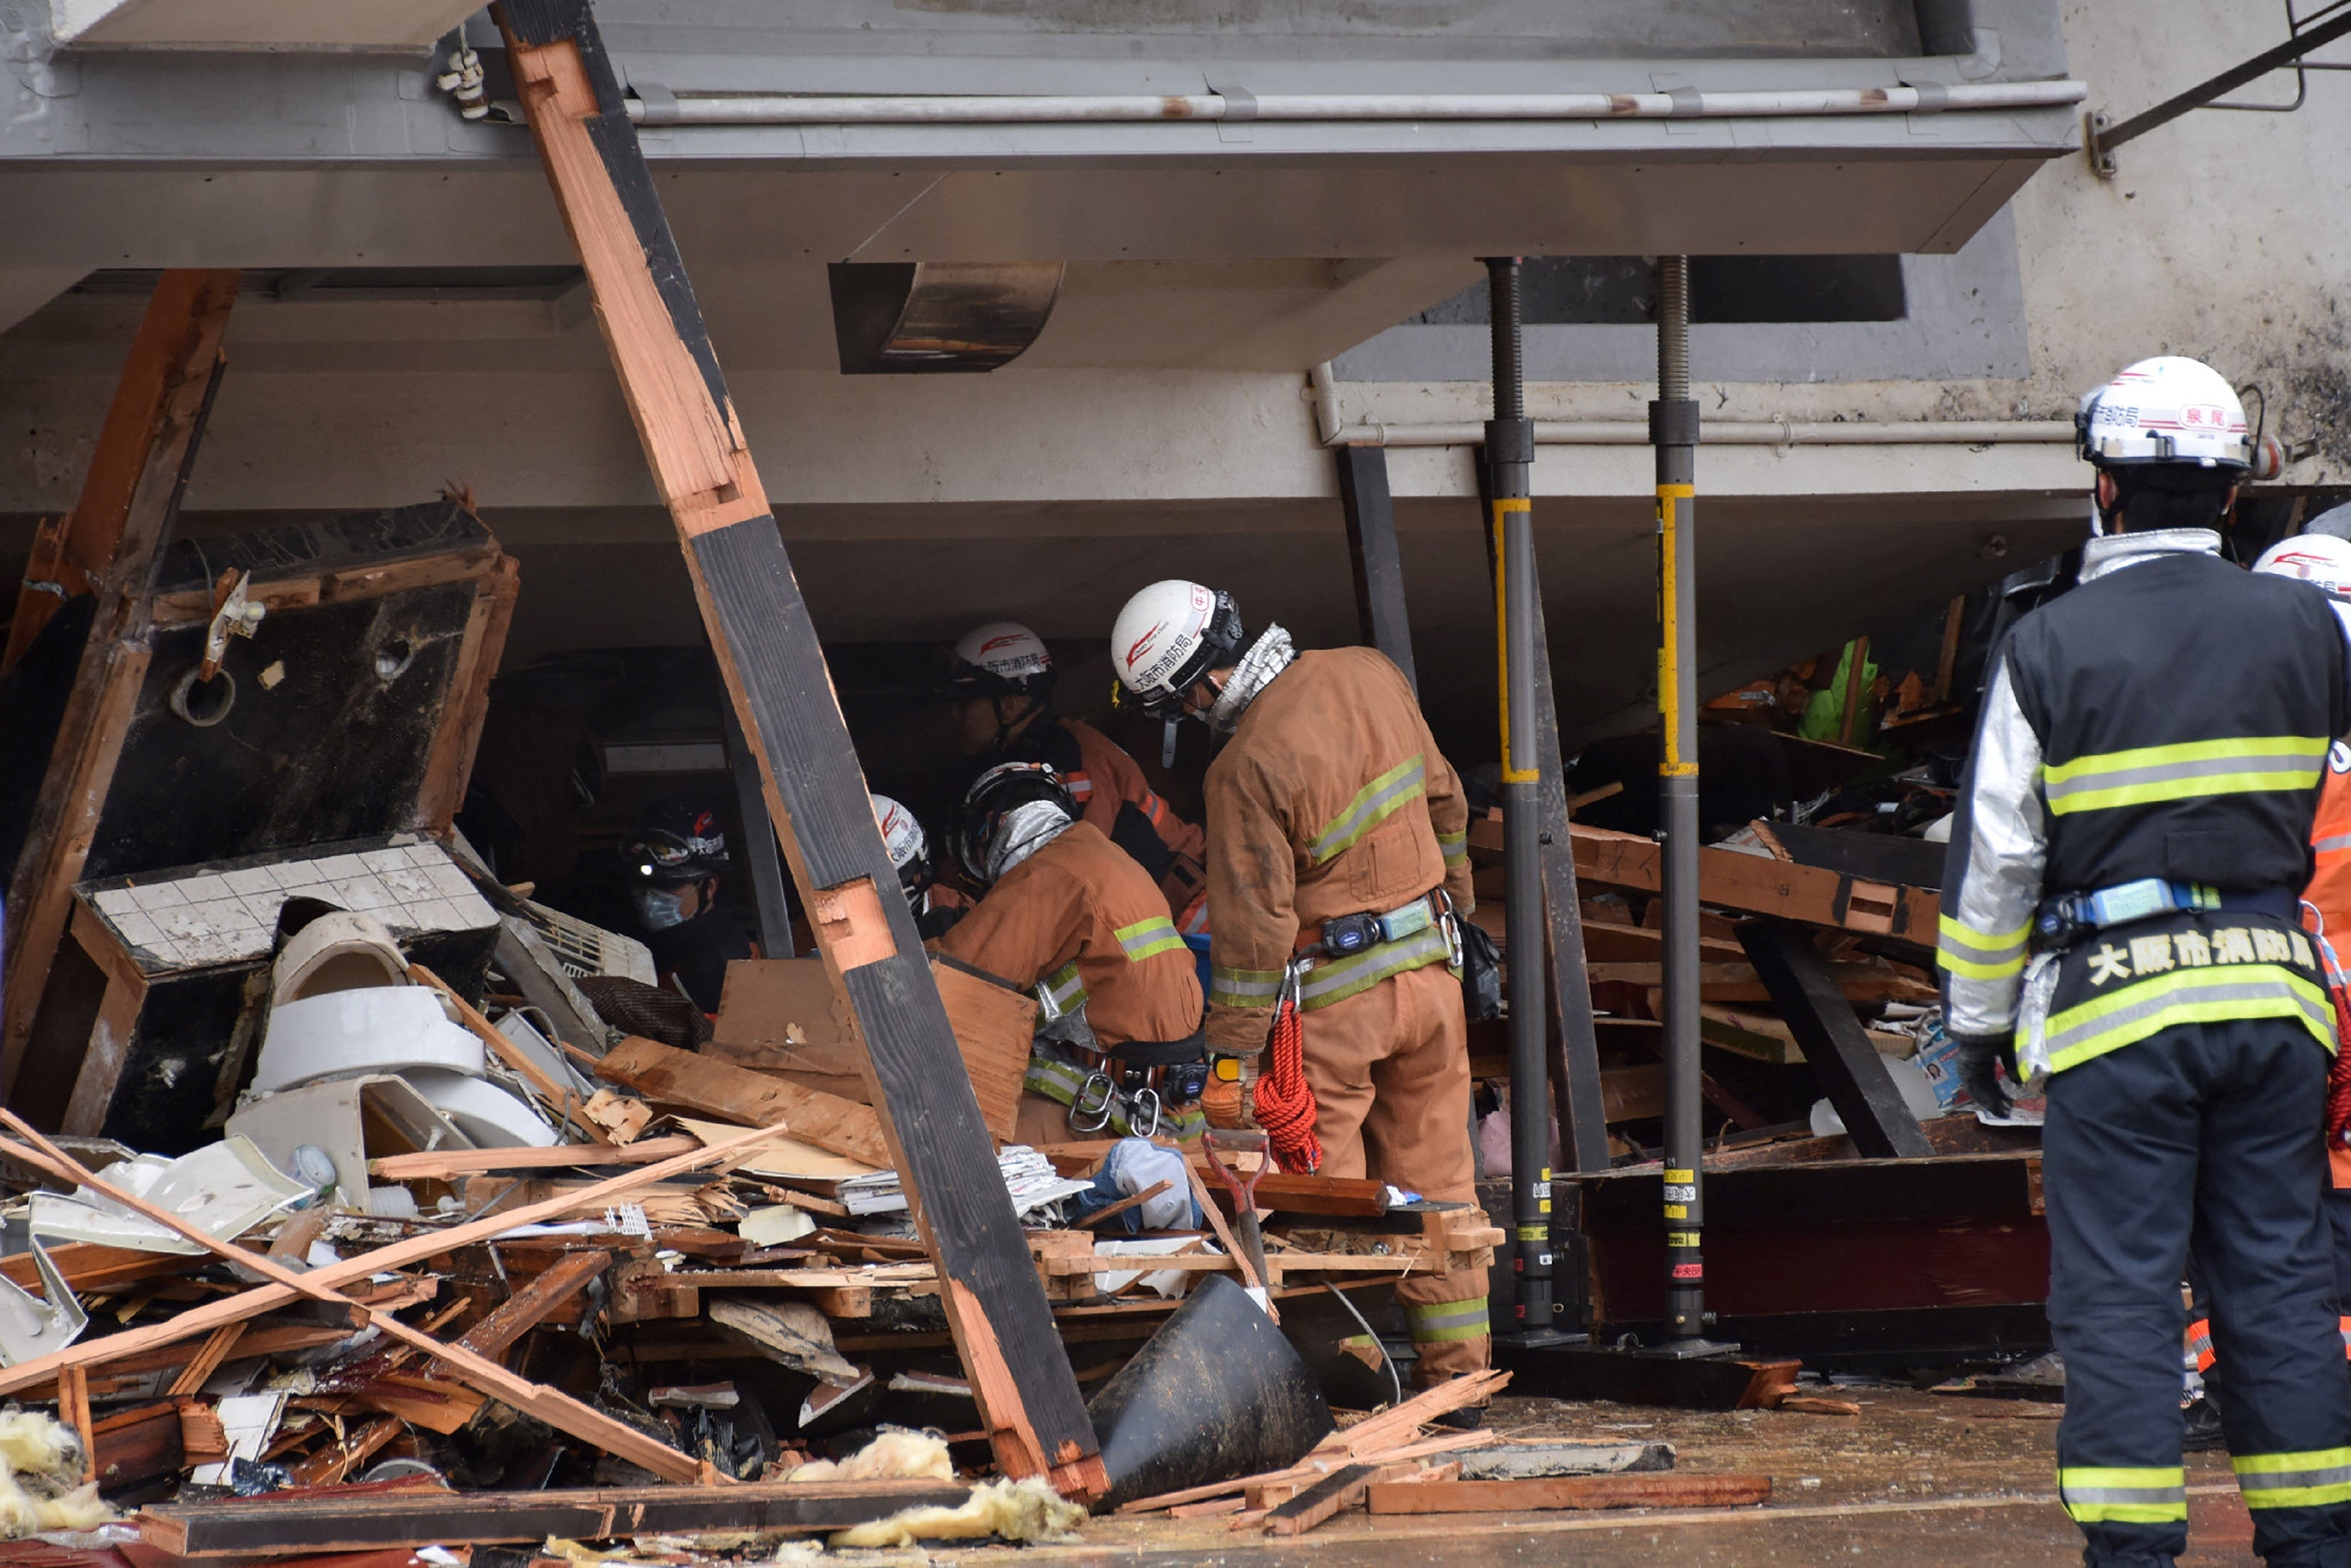 Firefighters work at the scene where a building toppled over and crushed a house in the city of Wajima